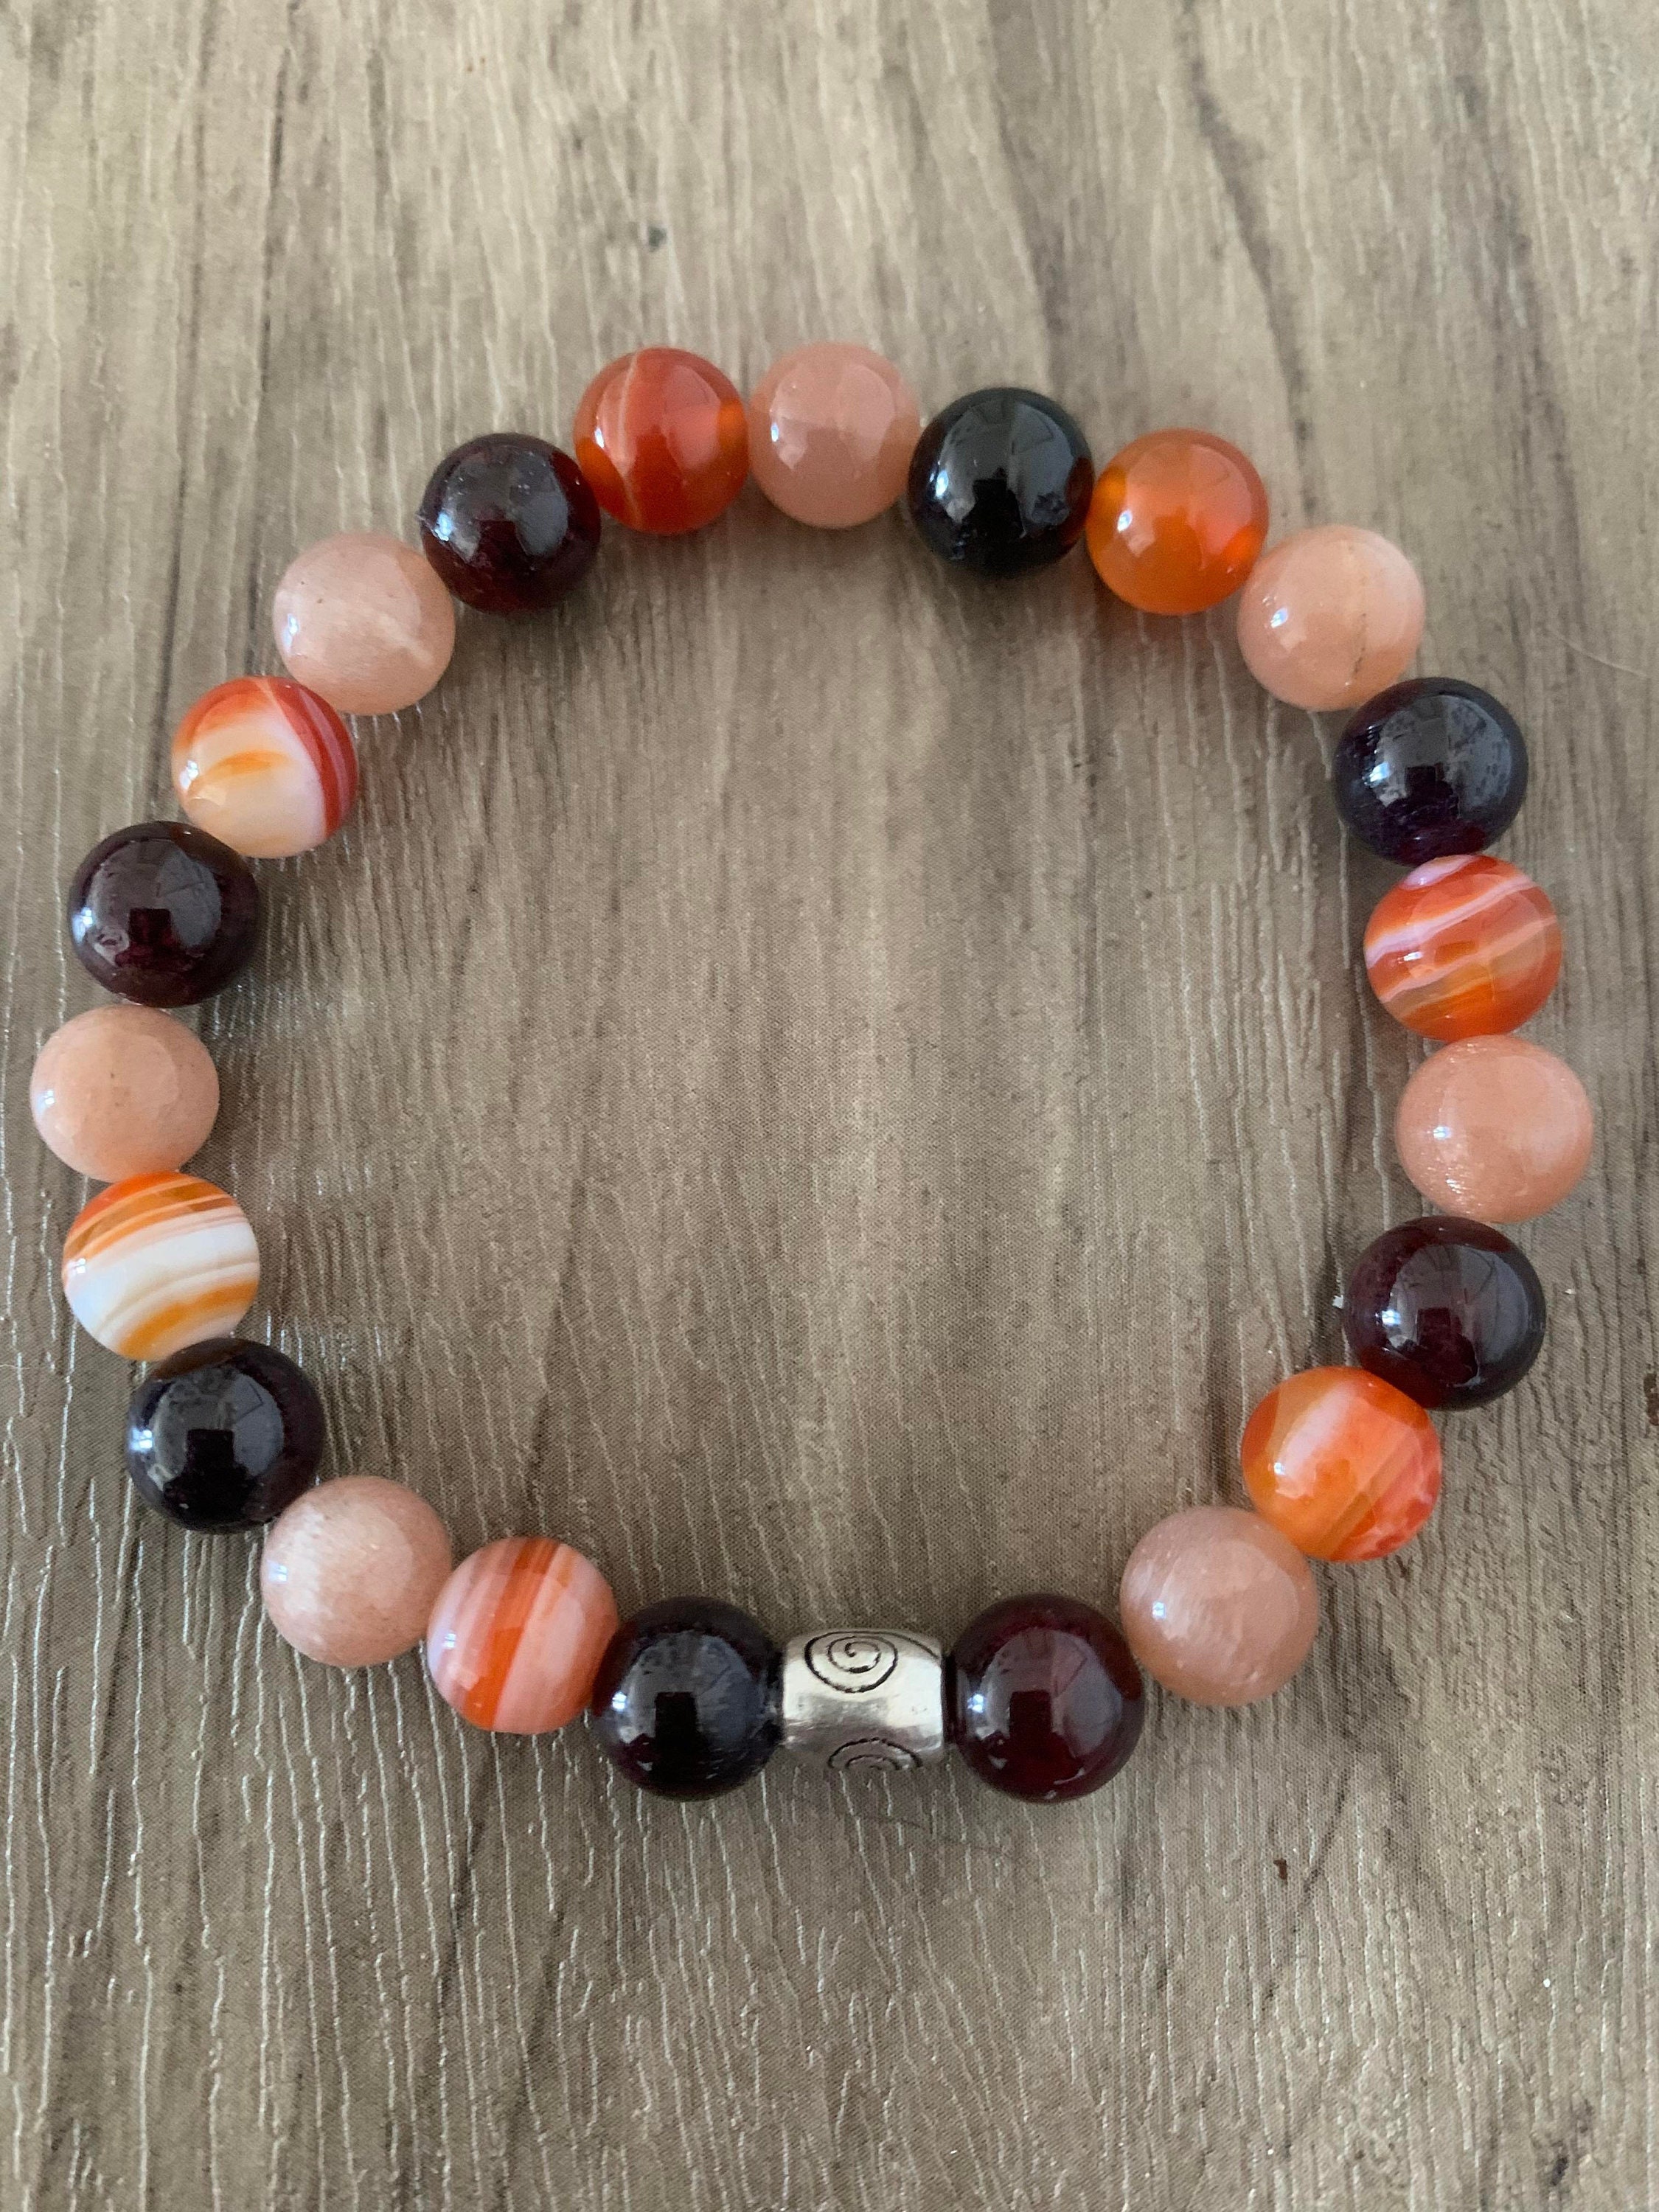 Garnet Strength and Courage Bracelet Pearls 6 or 8 mm Carnelian and Sunstone